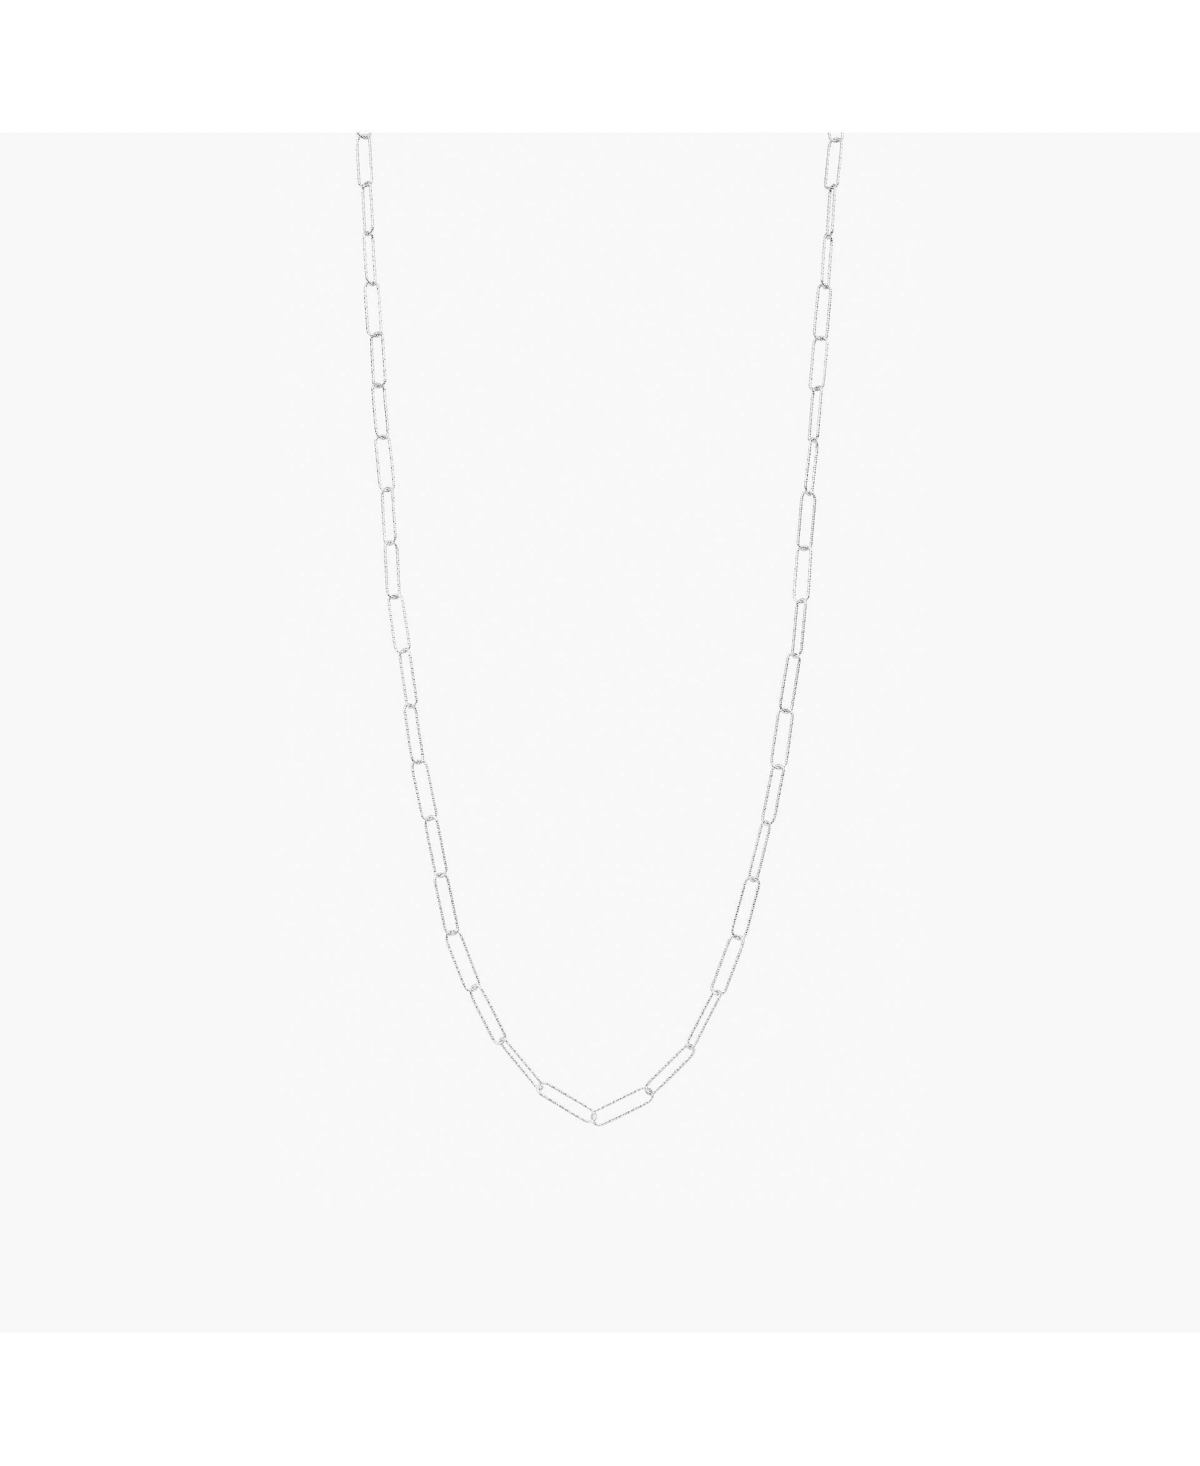 Long Sinai Chain Necklace - Silver